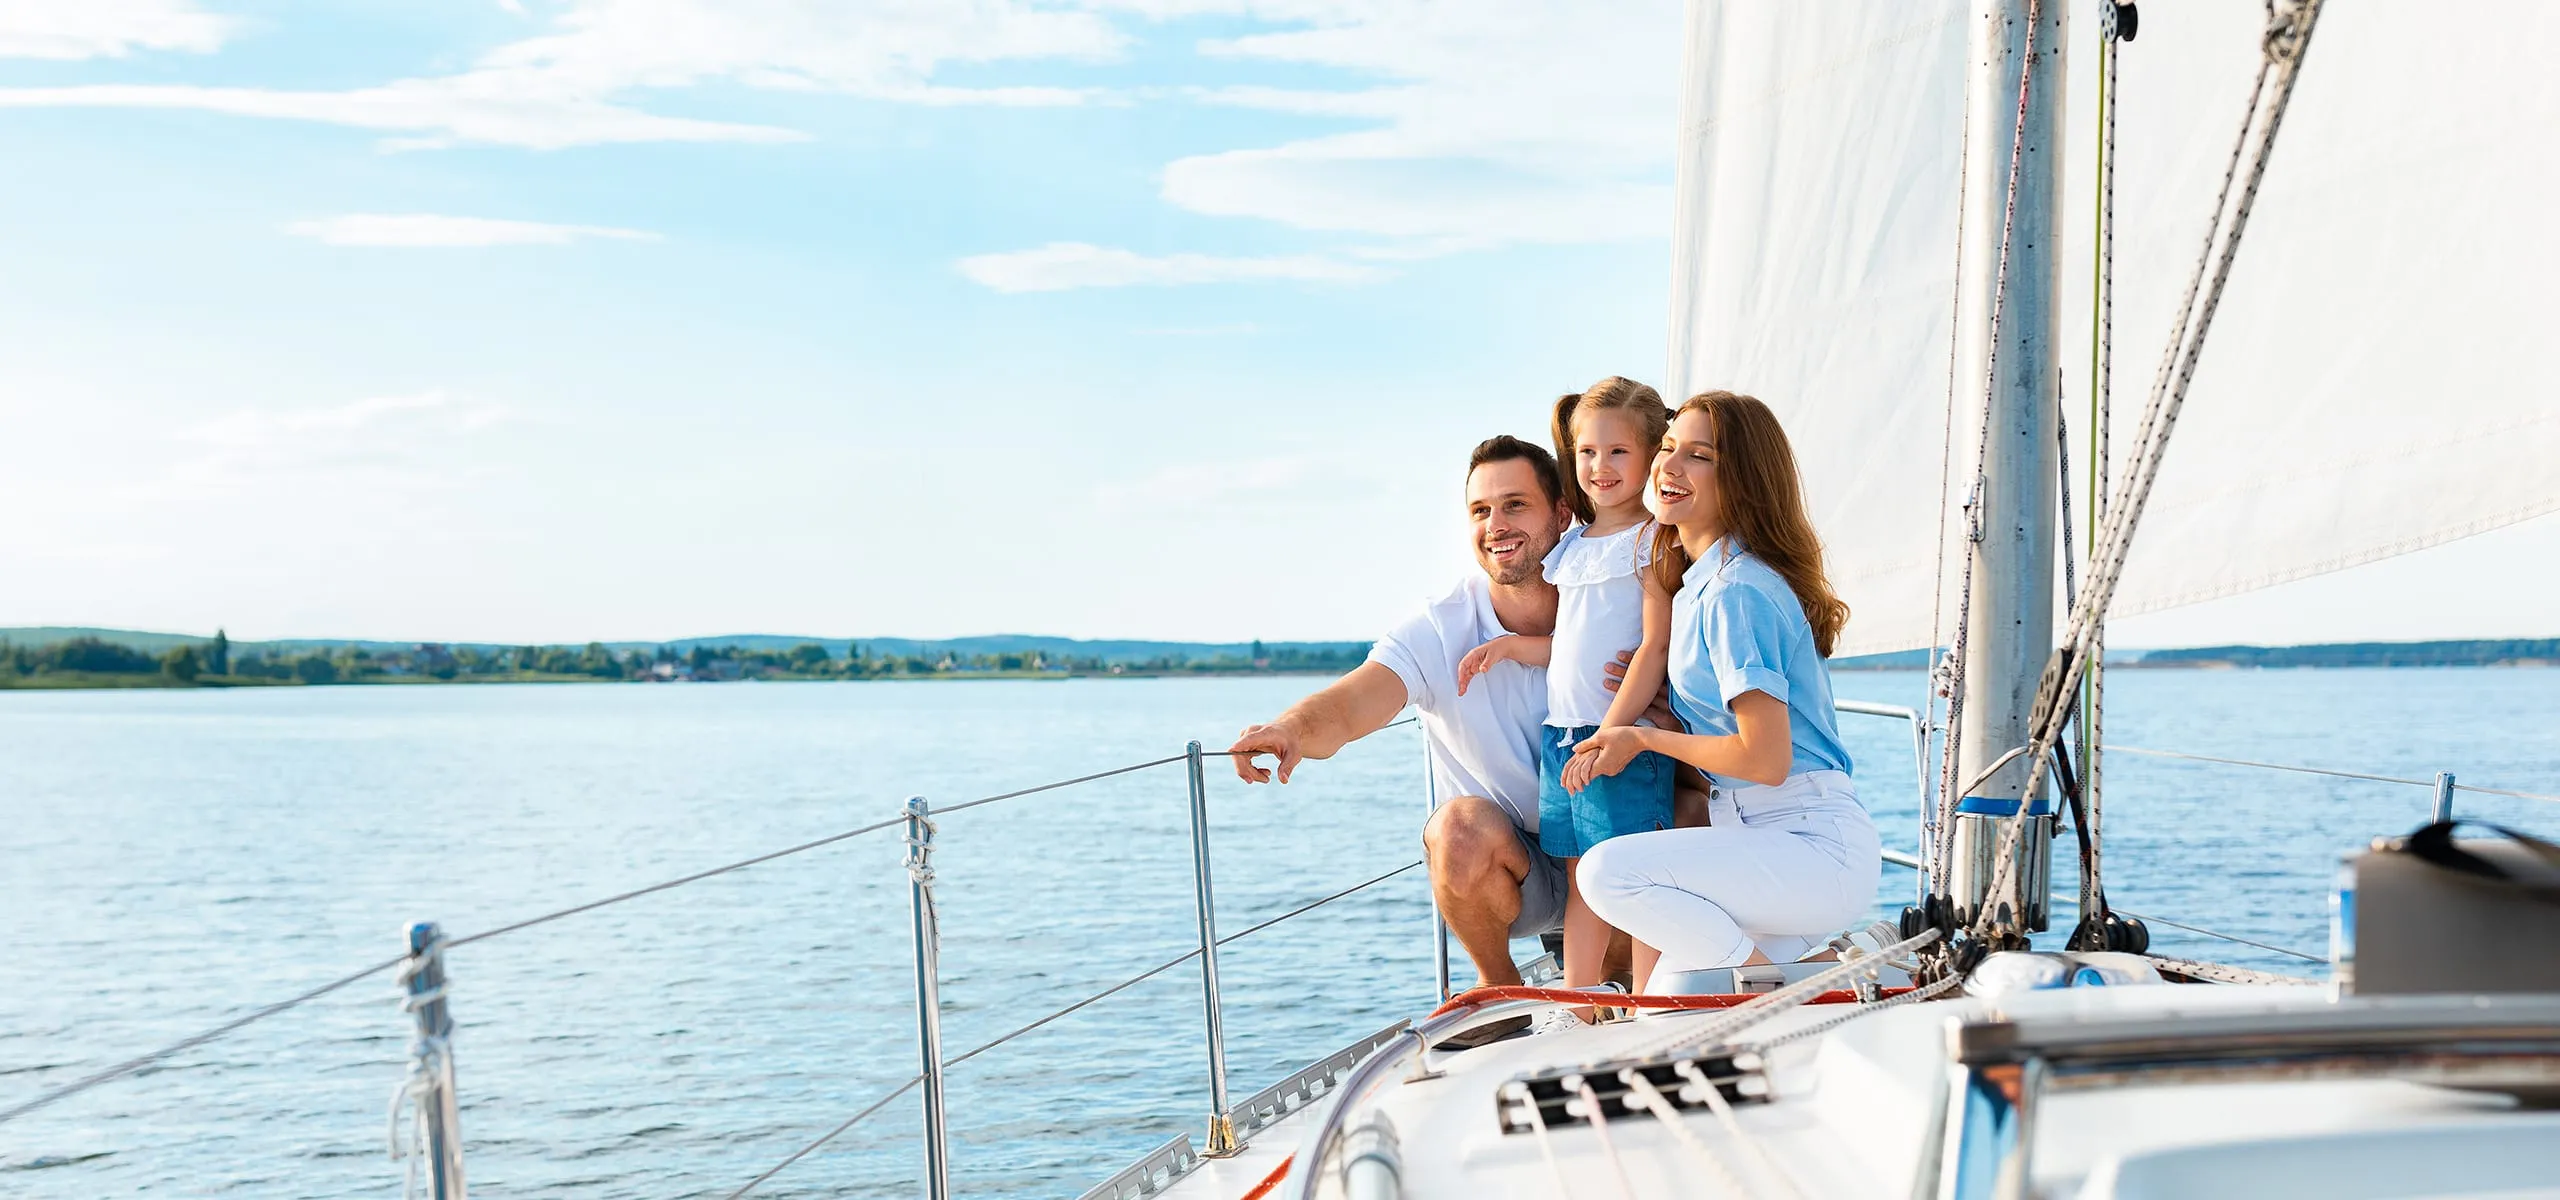 Specialized law services in all aspects of yachting